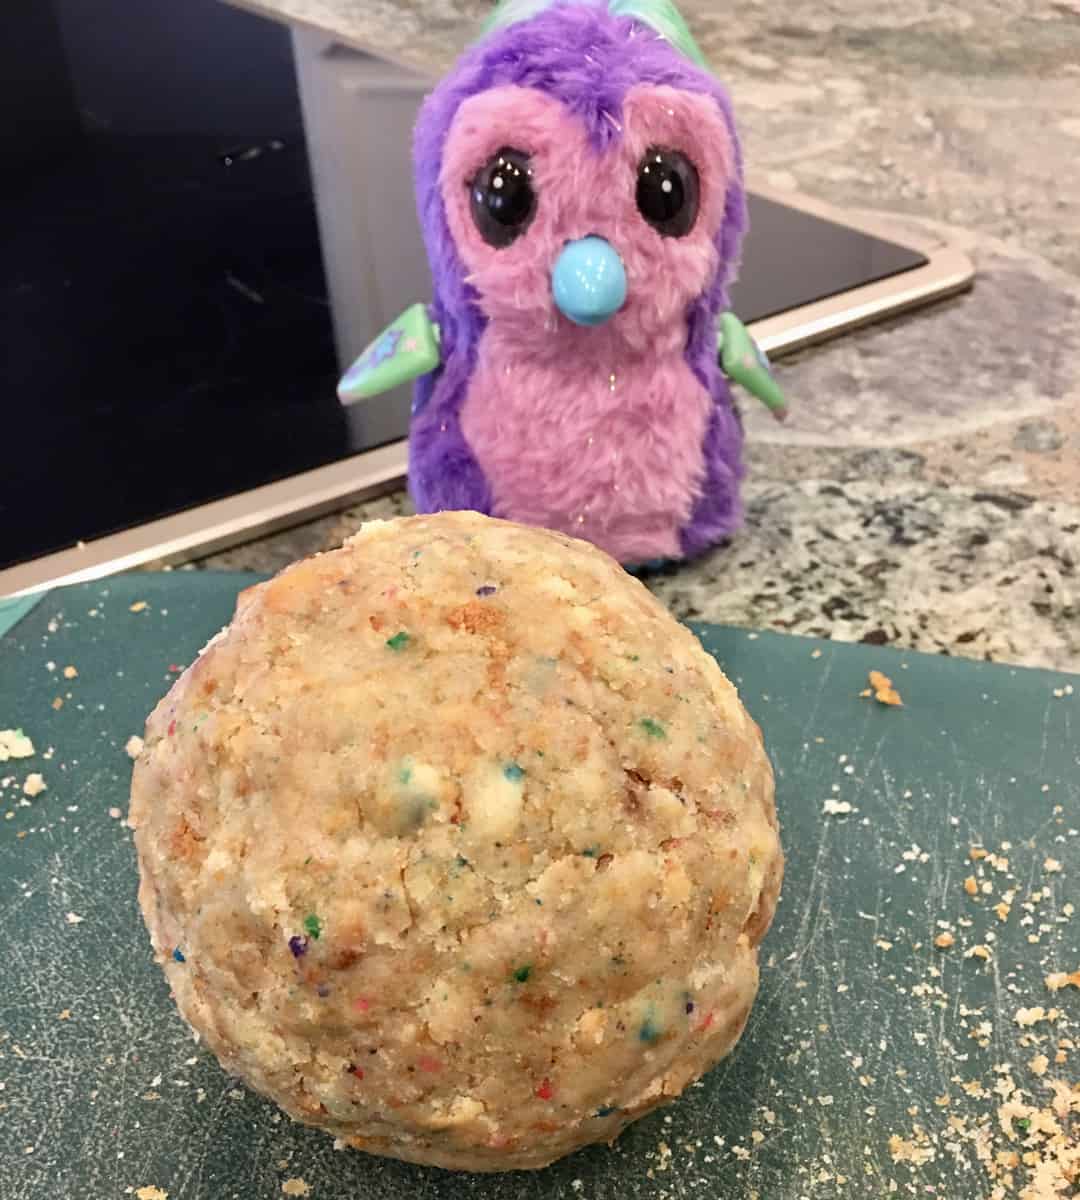 head for the hatchimals cake.  